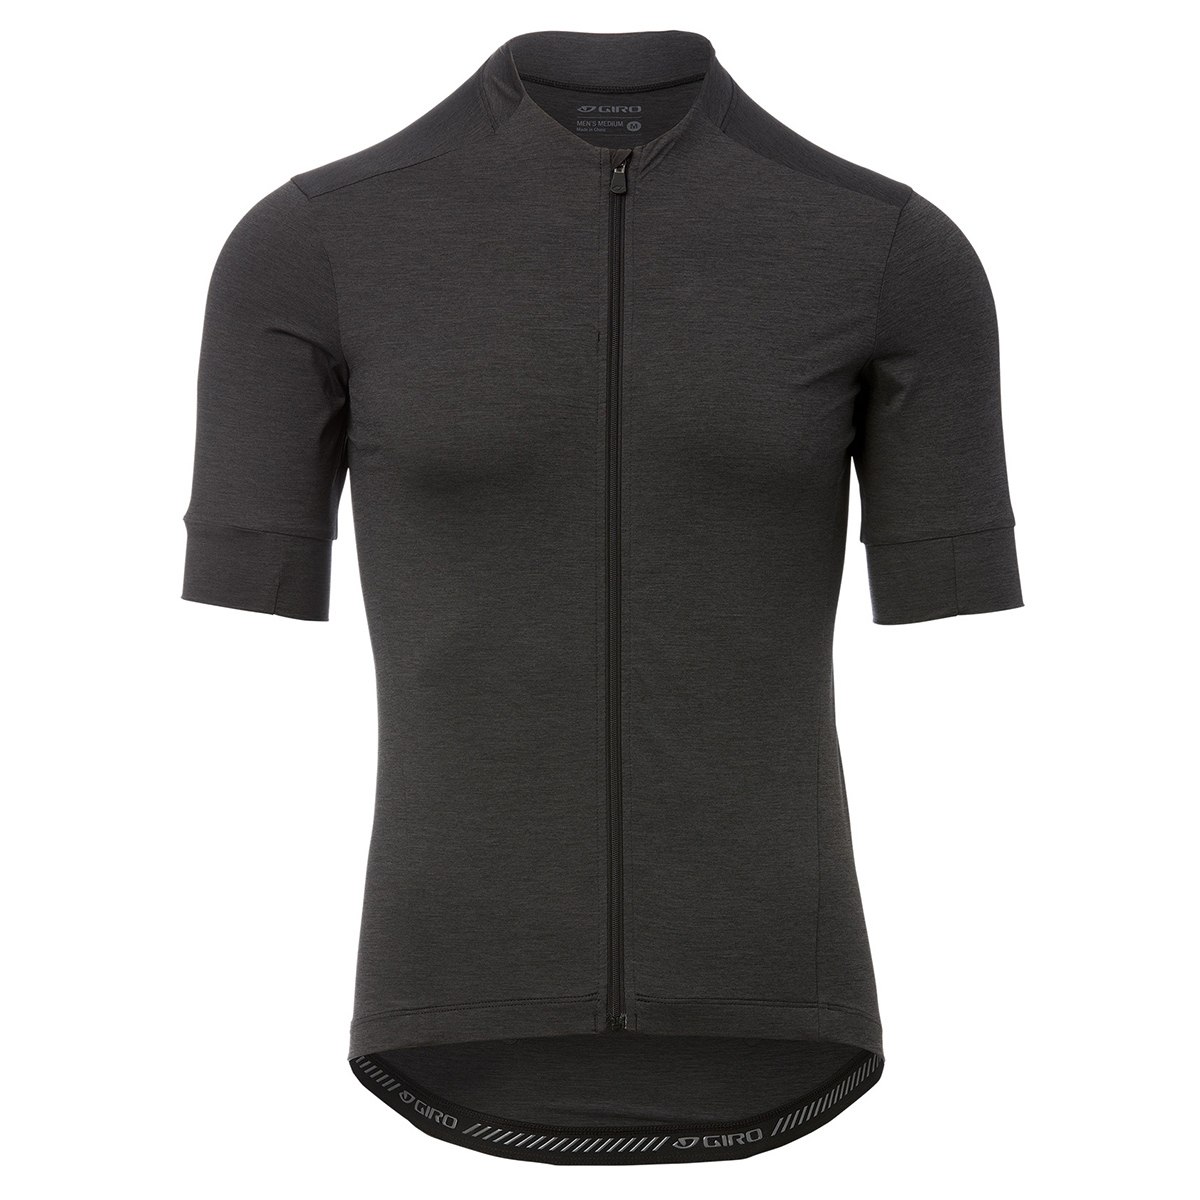 Picture of Giro New Road Short Sleeve Jersey Men - charcoal heather